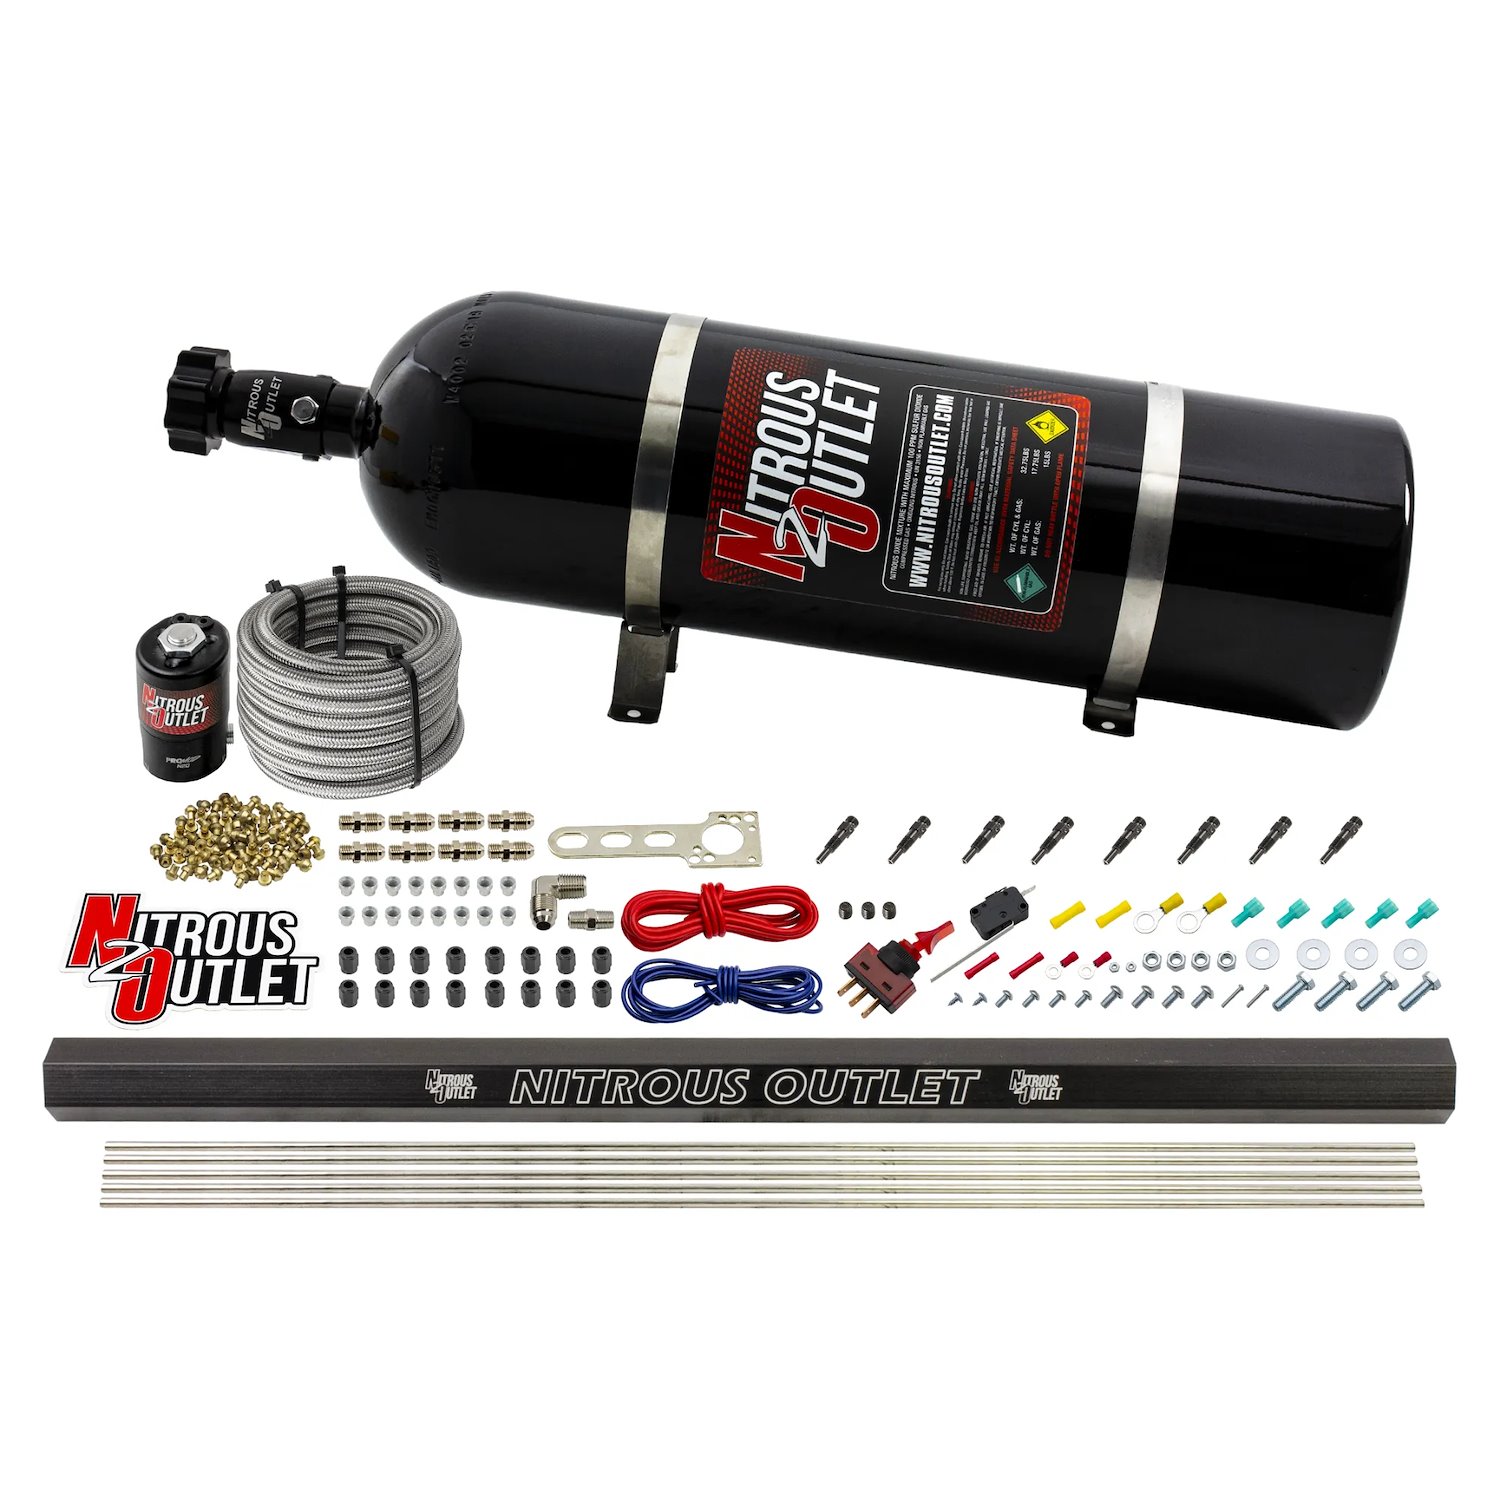 00-10470-H-R-SBT-15 Dry 8-Cyl Direct Port System, .122 Nitrous Solenoid/Injection Rail/SBT Discharge Nozzles, 100-400HP, 15lb